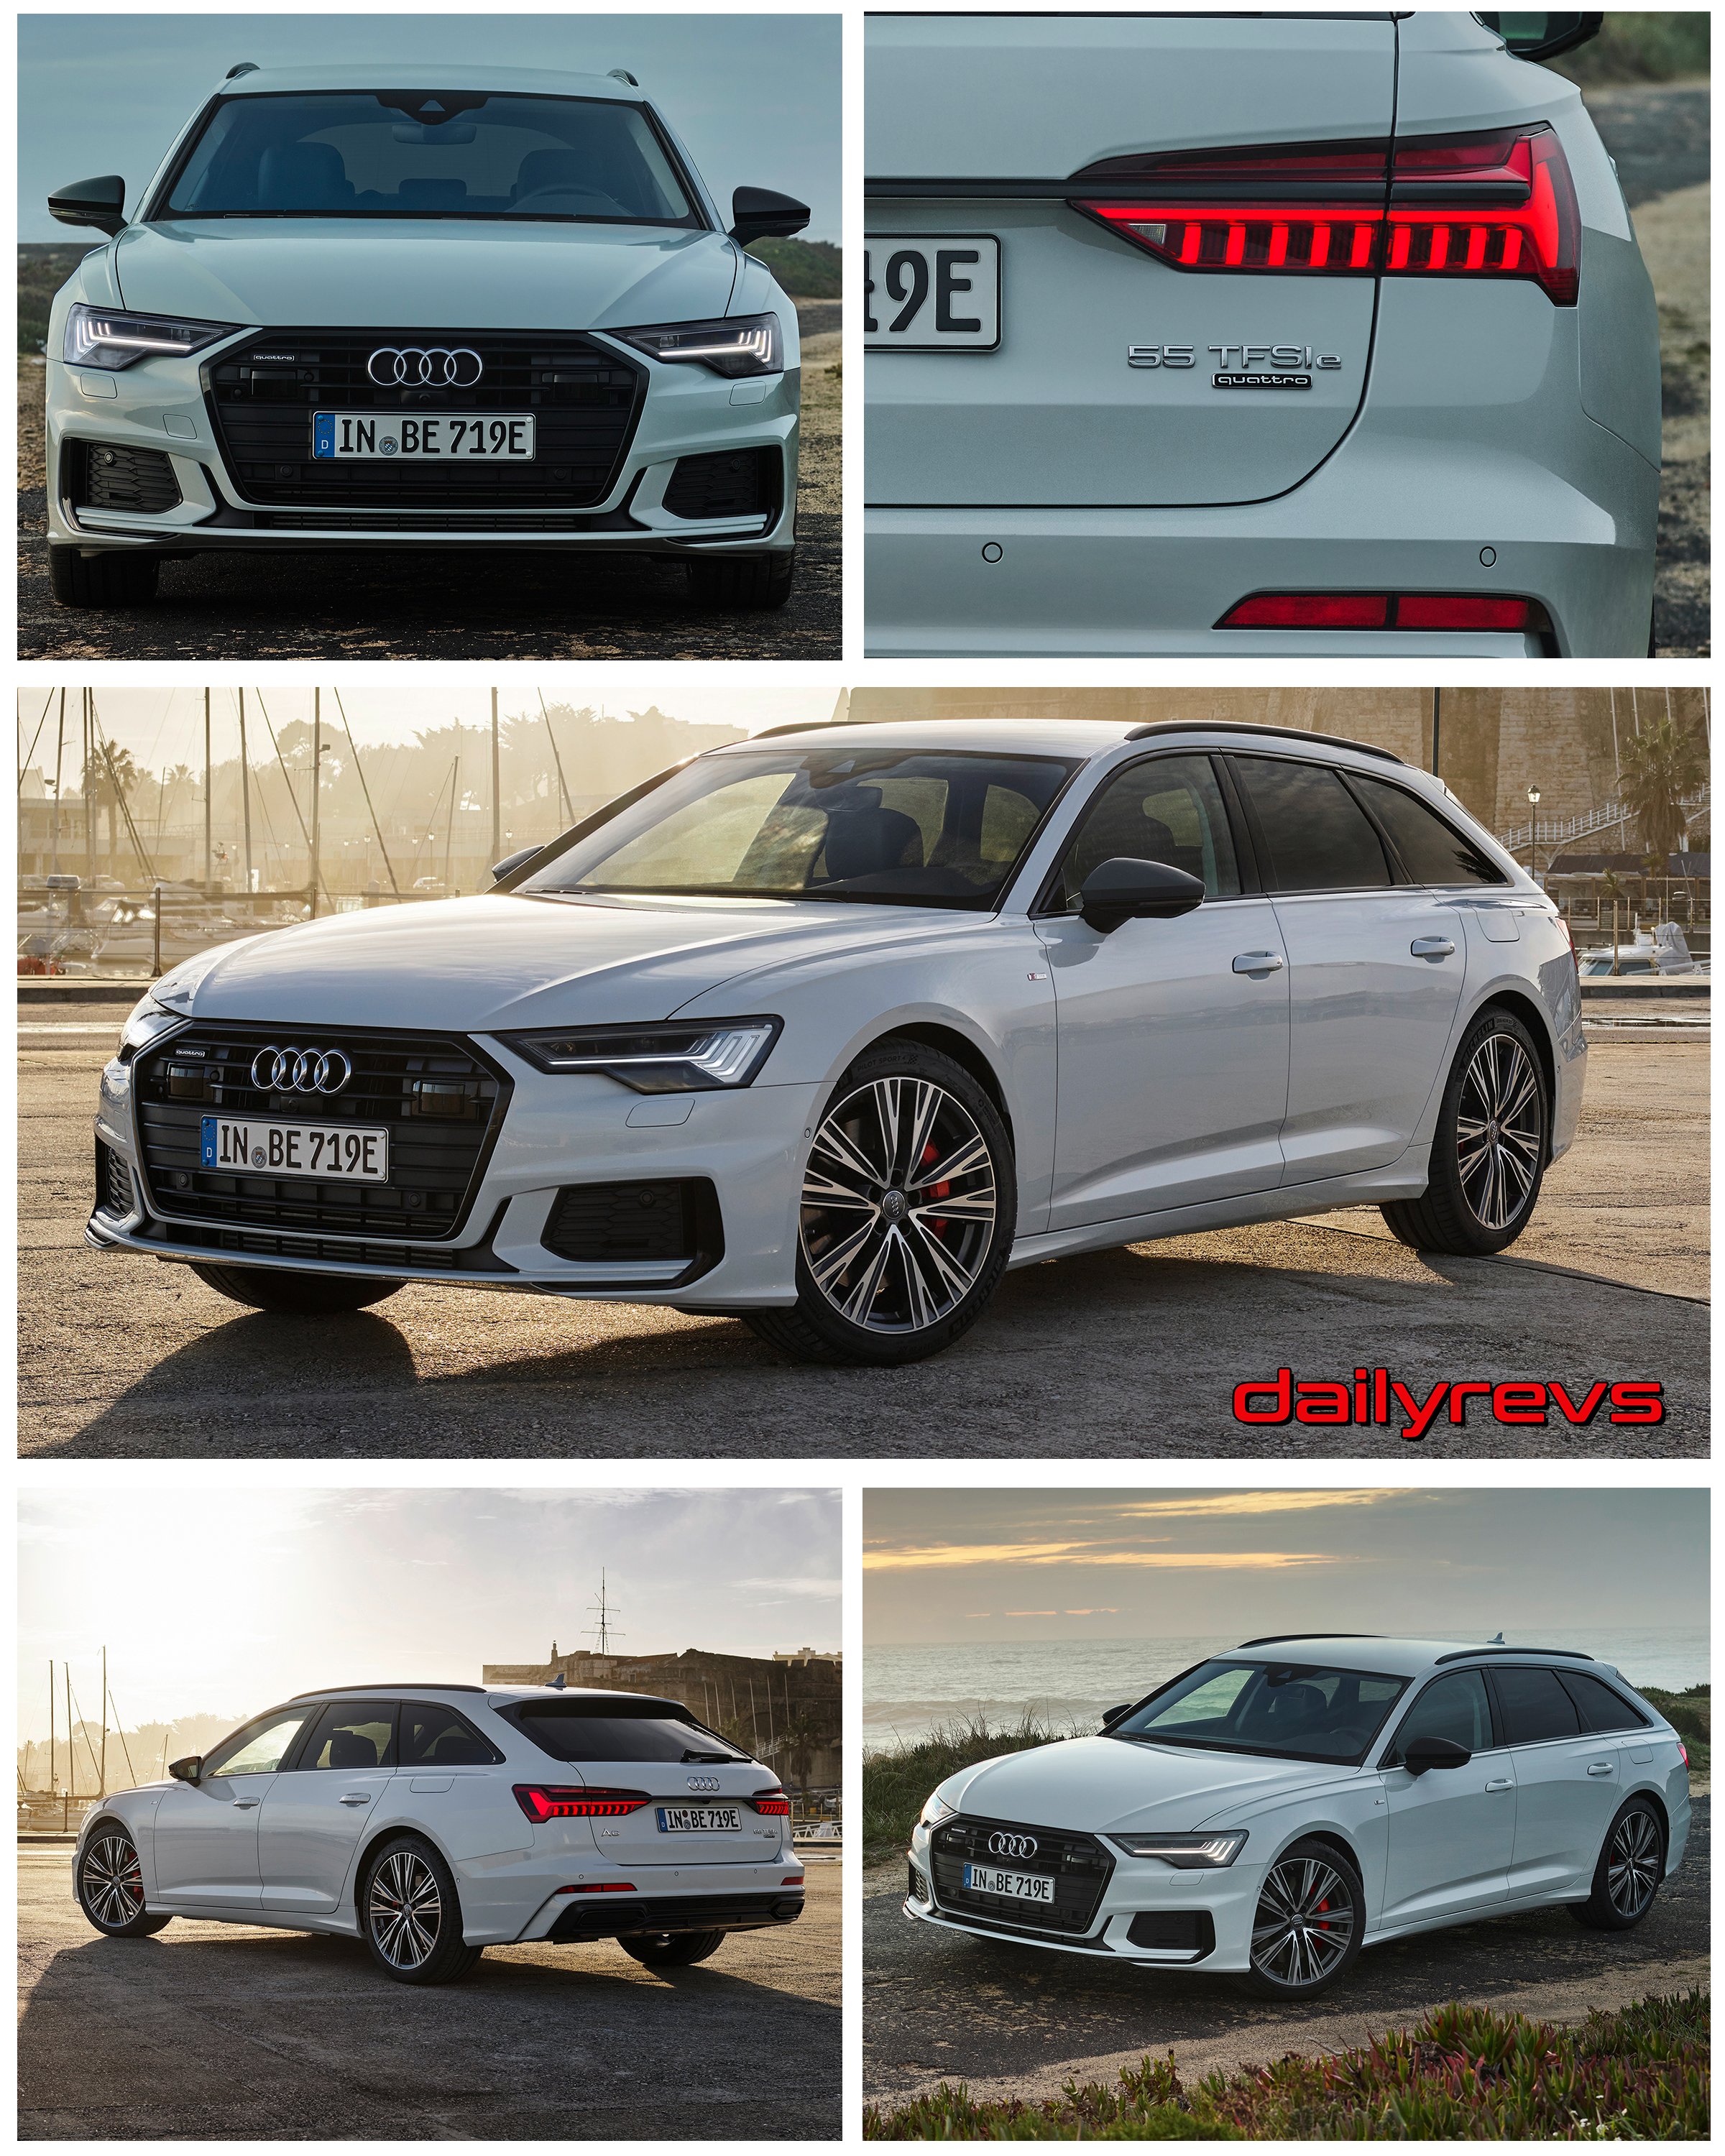 Audi A6 (C8) Avant Images, pictures, gallery